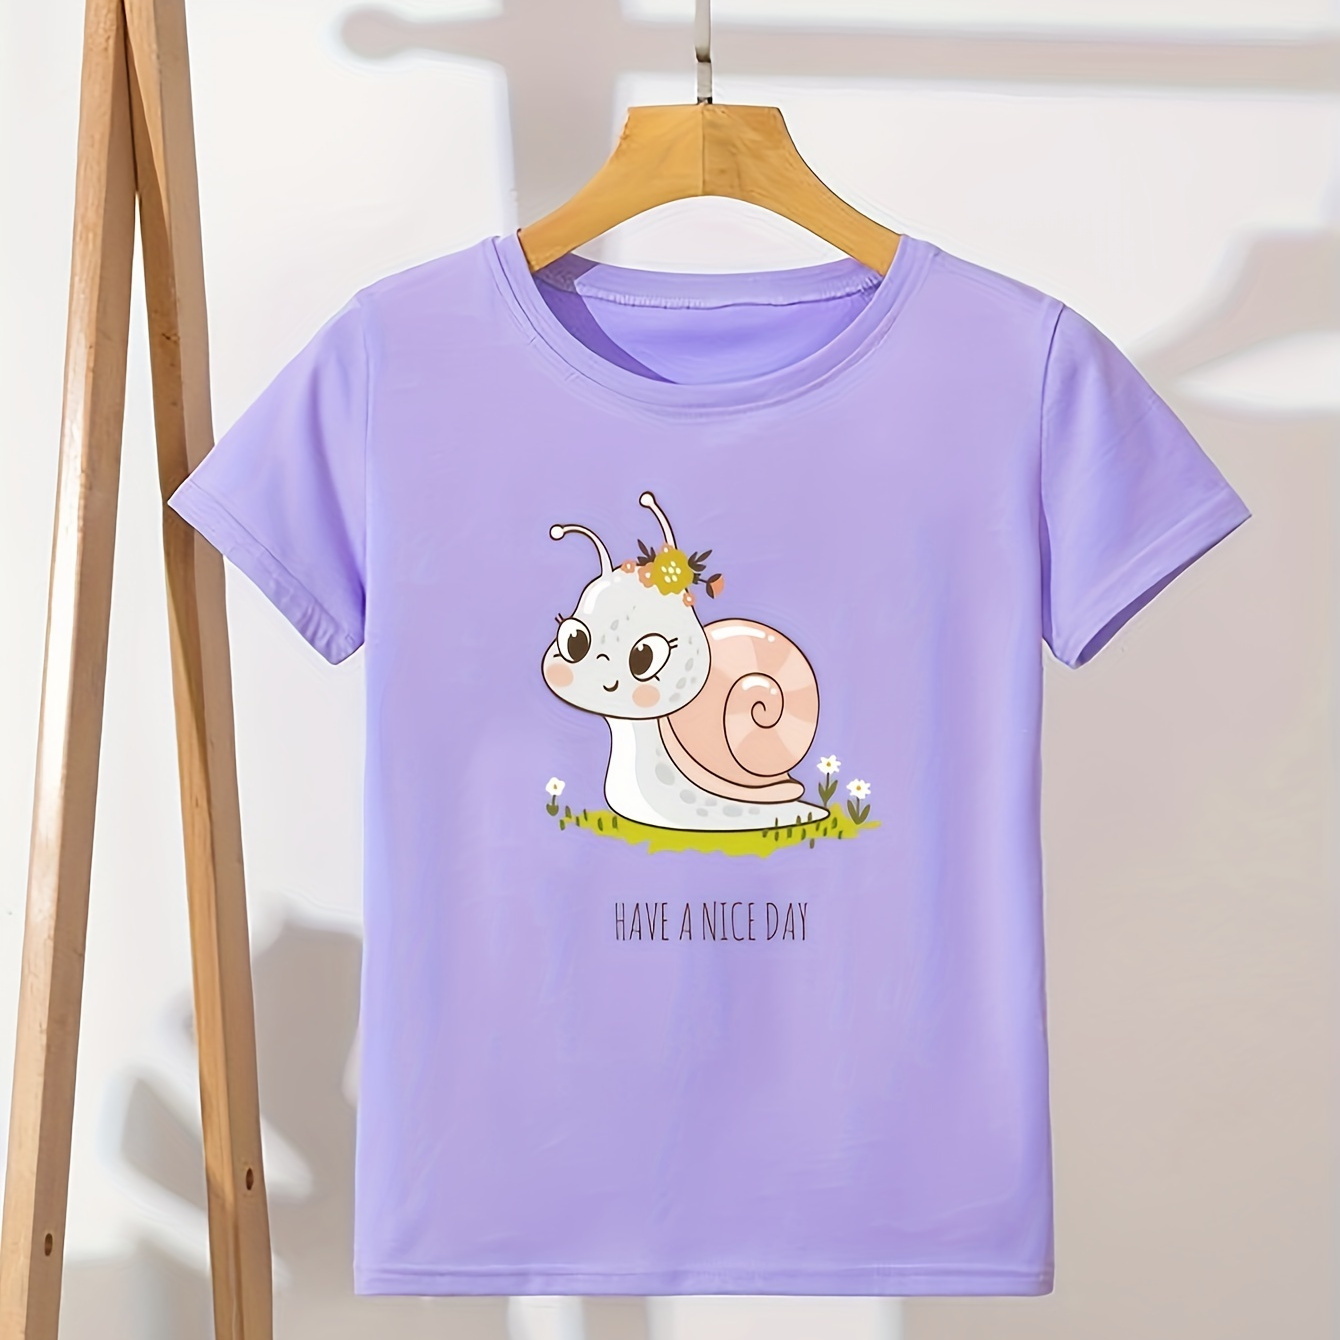 

Have A Nice Day & Cartoon Snail Graphic Print, Girls' Casual & Comfy Crew Neck Short Sleeve Tee For Spring & Summer, Girls' Clothes For Outdoor Activities